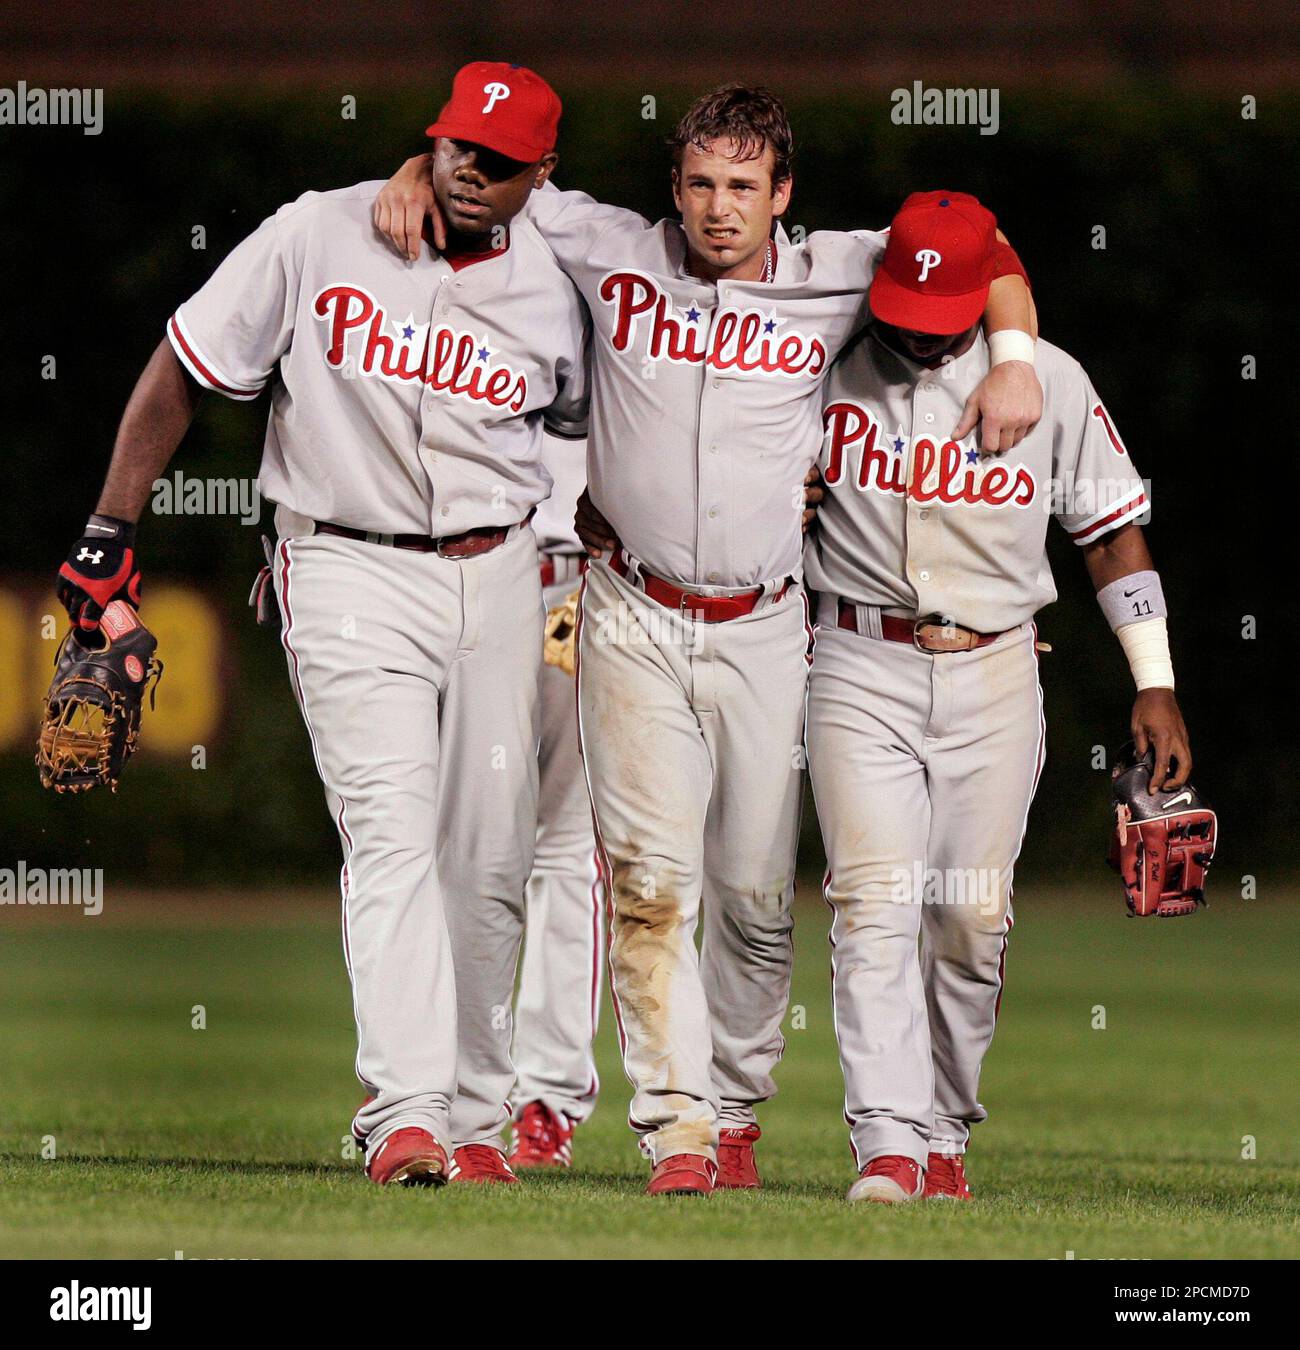 Philadelphia Phillies center fielder Aaron Rowand, center, is helped off  the field by teammates Ryan Howard, left, and Jimmy Rollins, right, after  colliding with second baseman Chase Utley while chasing a fly